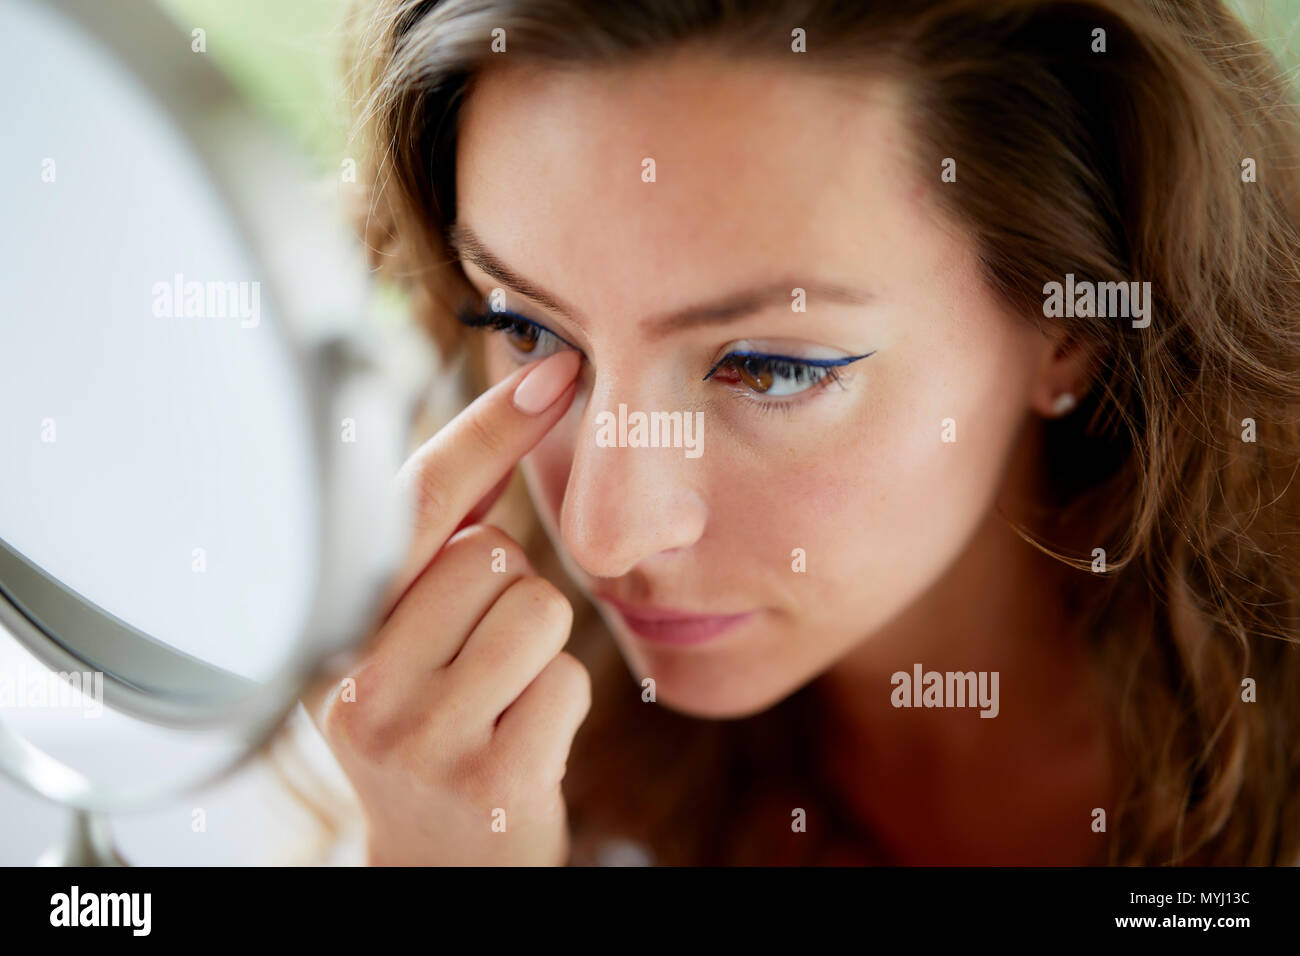 girl looking at her eyes in a mirror Stock Photo